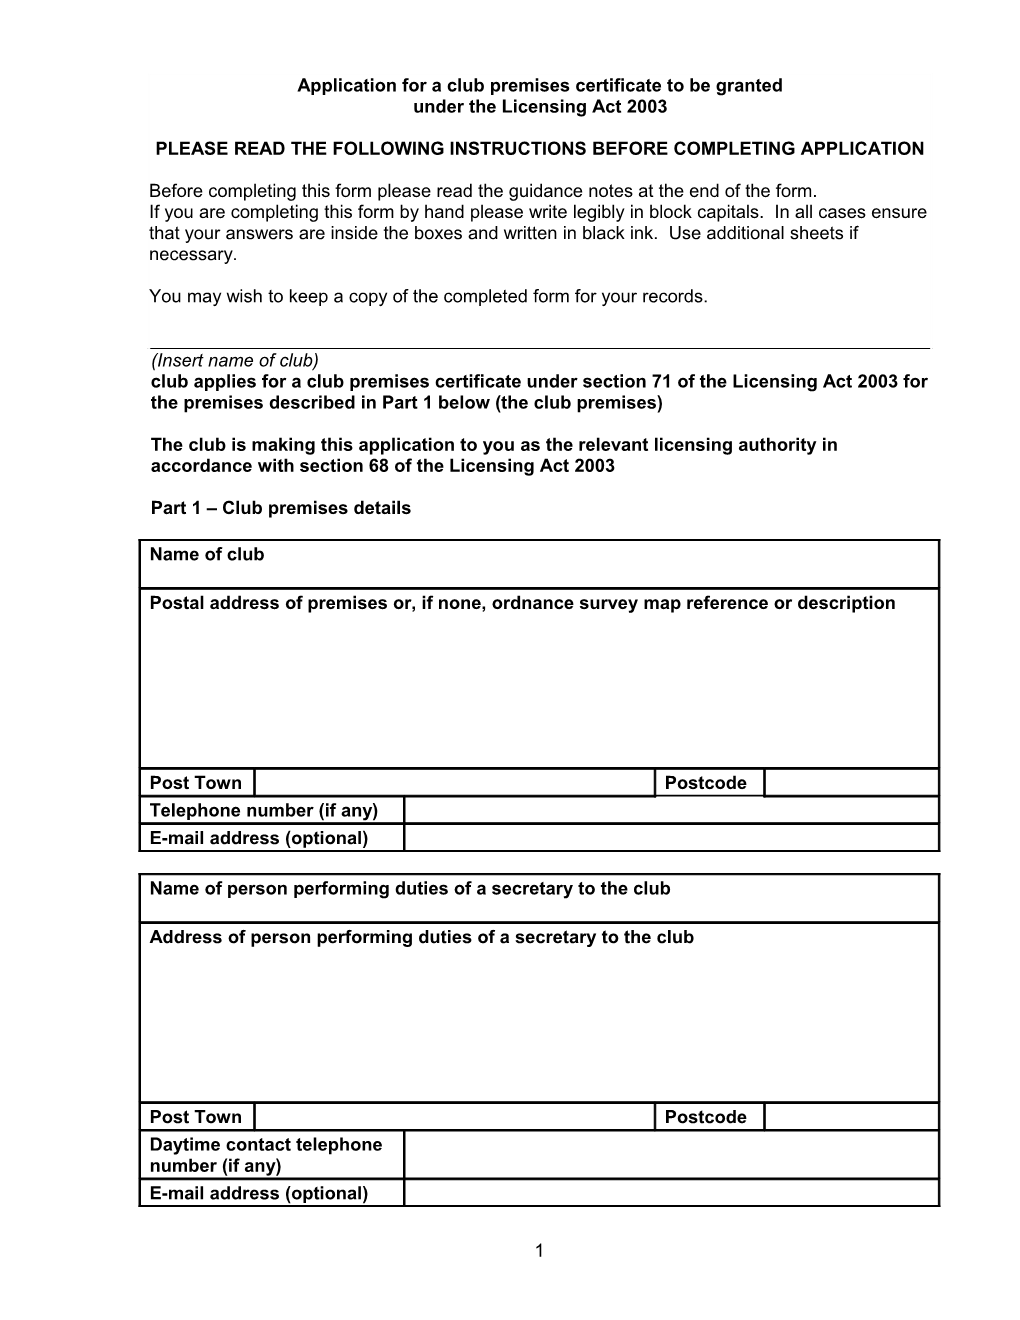 Application for a Club Premises Certificate